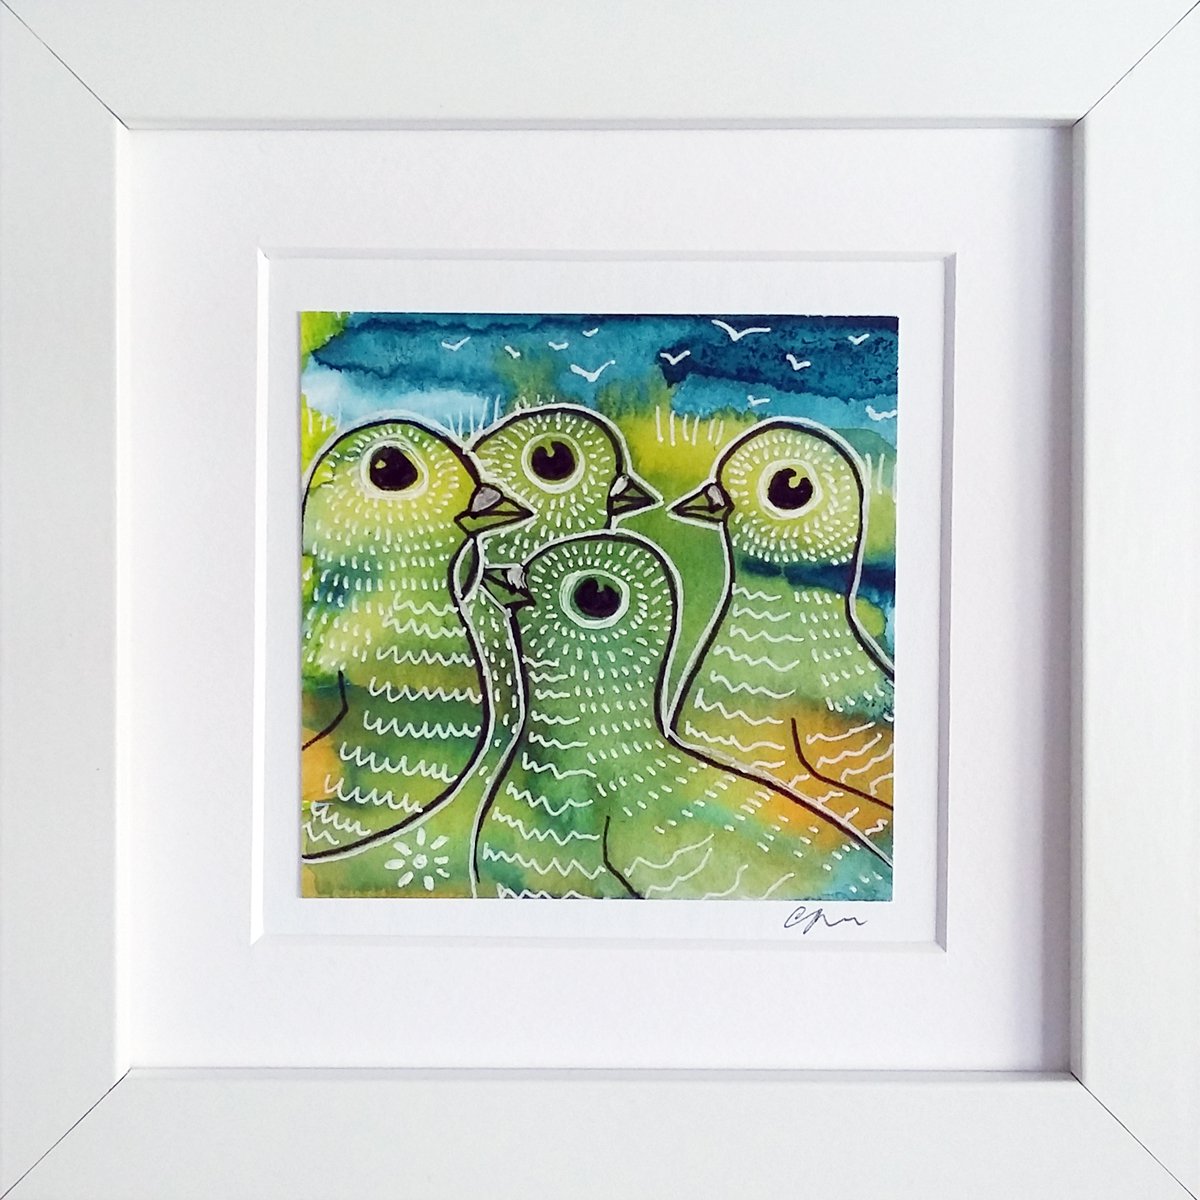 Feathered friends #1 (framed and ready to hang) by Carolynne Coulson